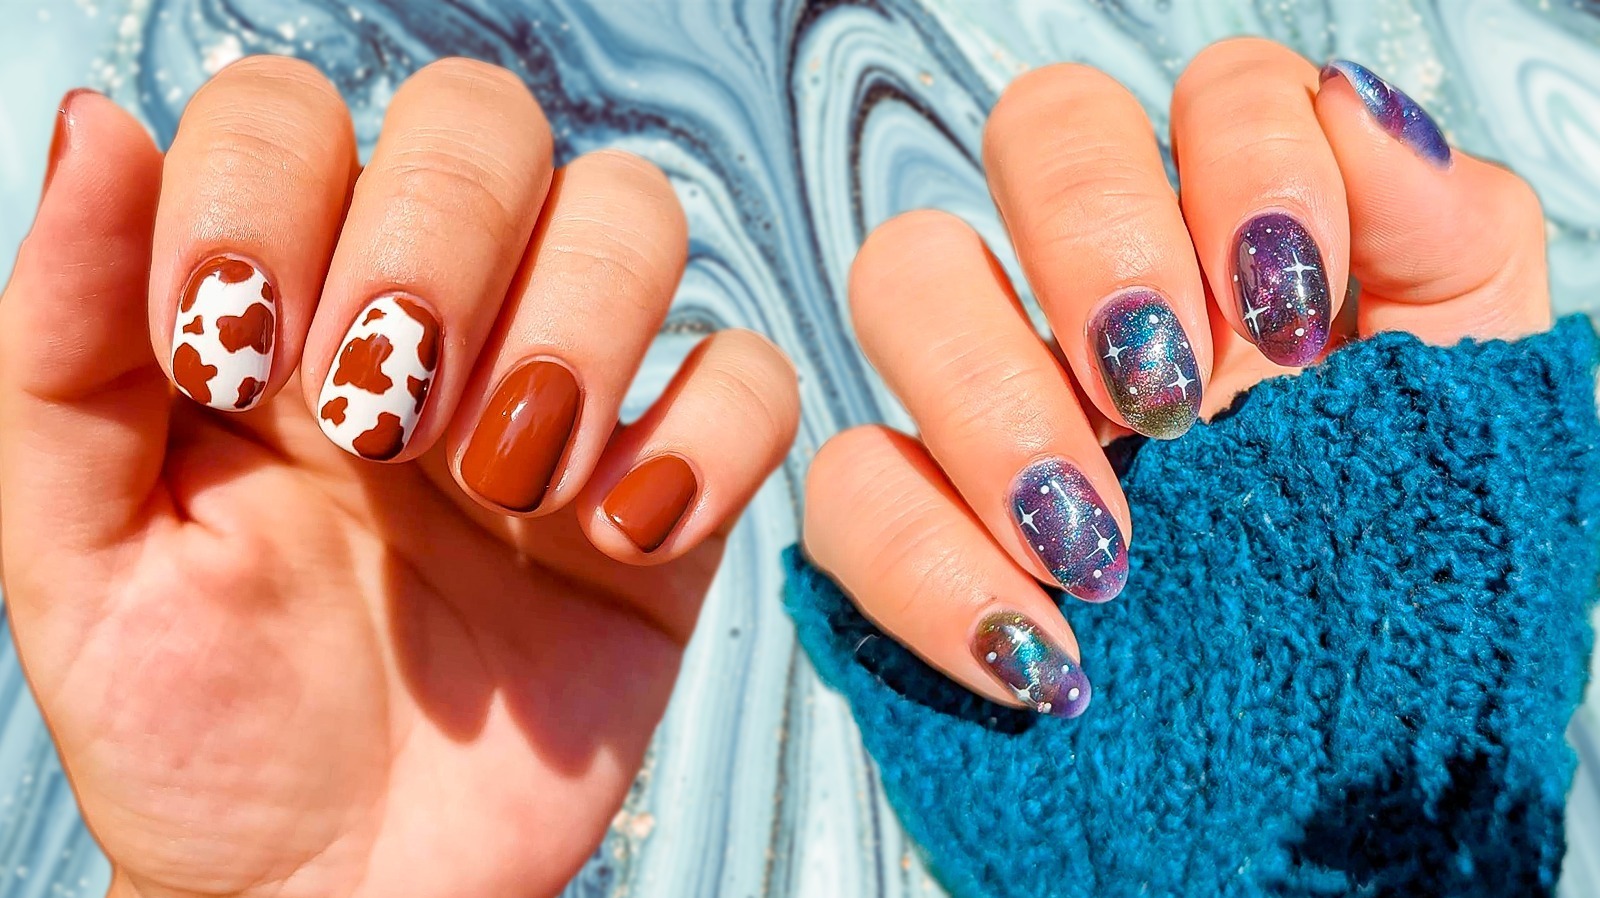 51 Really Cute Acrylic Nail Designs You'll Love - StayGlam